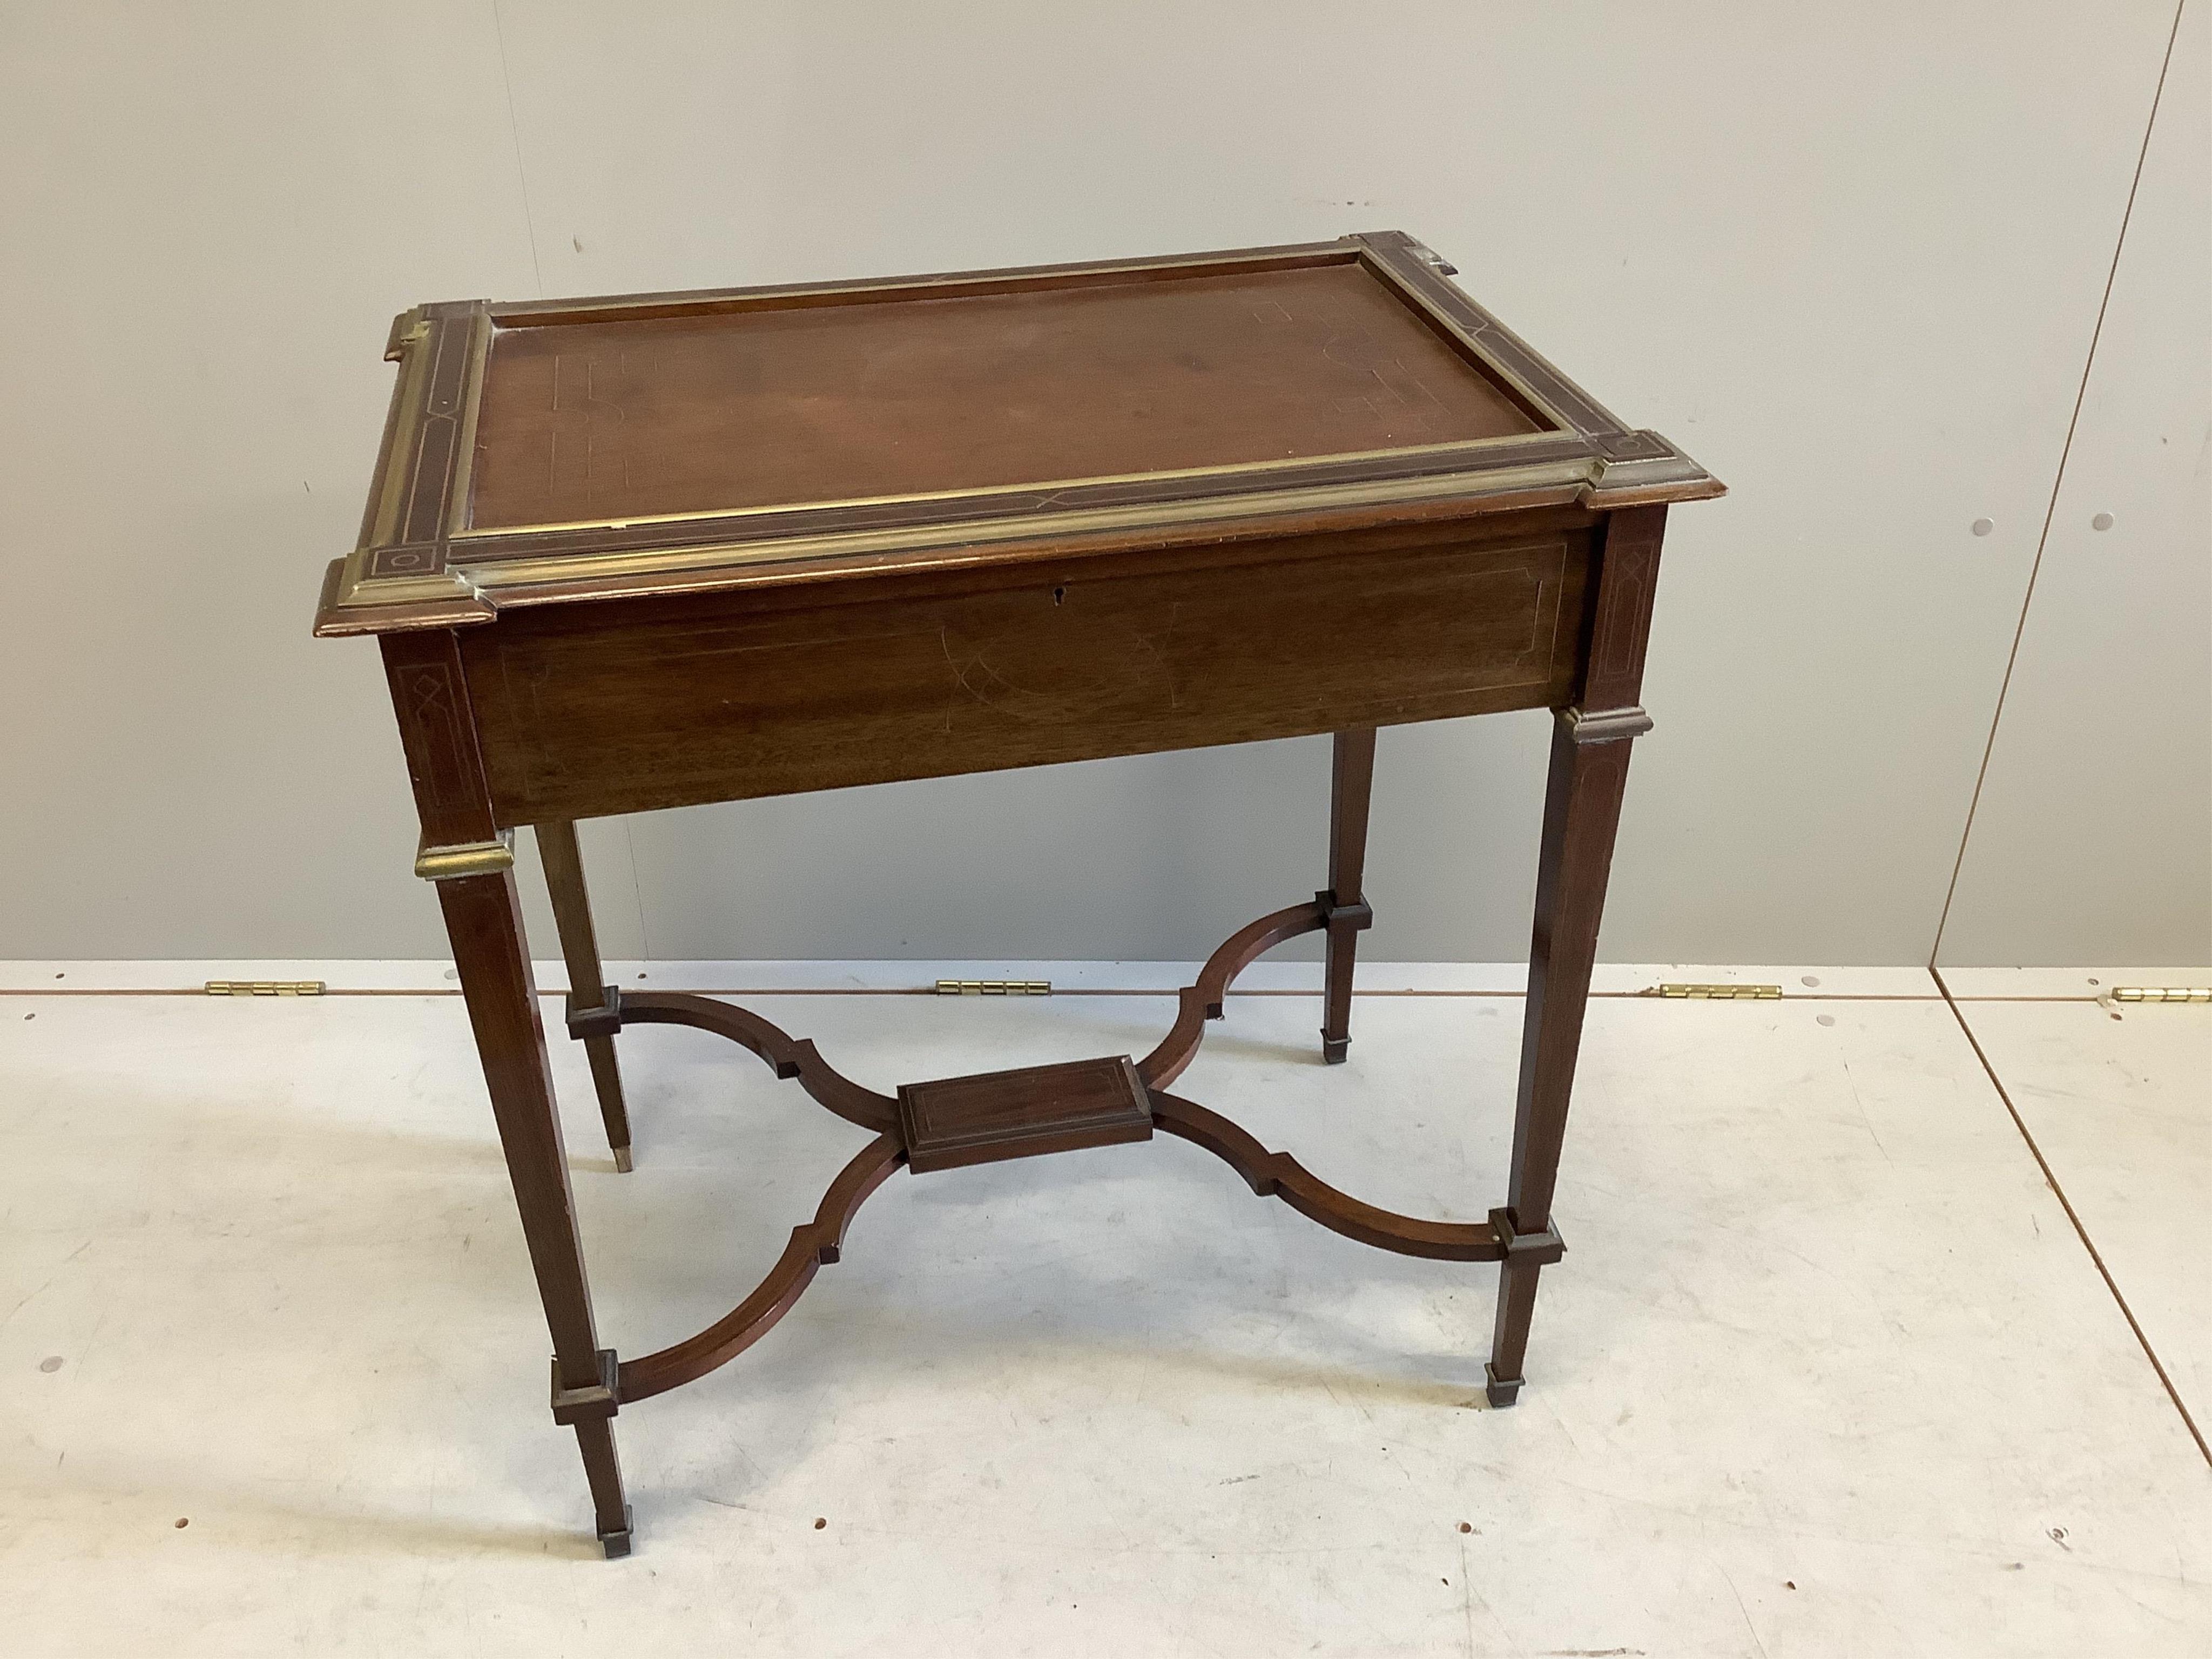 A 19th century French Empire mahogany writing table with gilt brass inlay, frieze drawer with fitted interior and twin pull-out candle slides, on square tapered legs and cross stretchers, width 71cm, depth 47cm, height 7